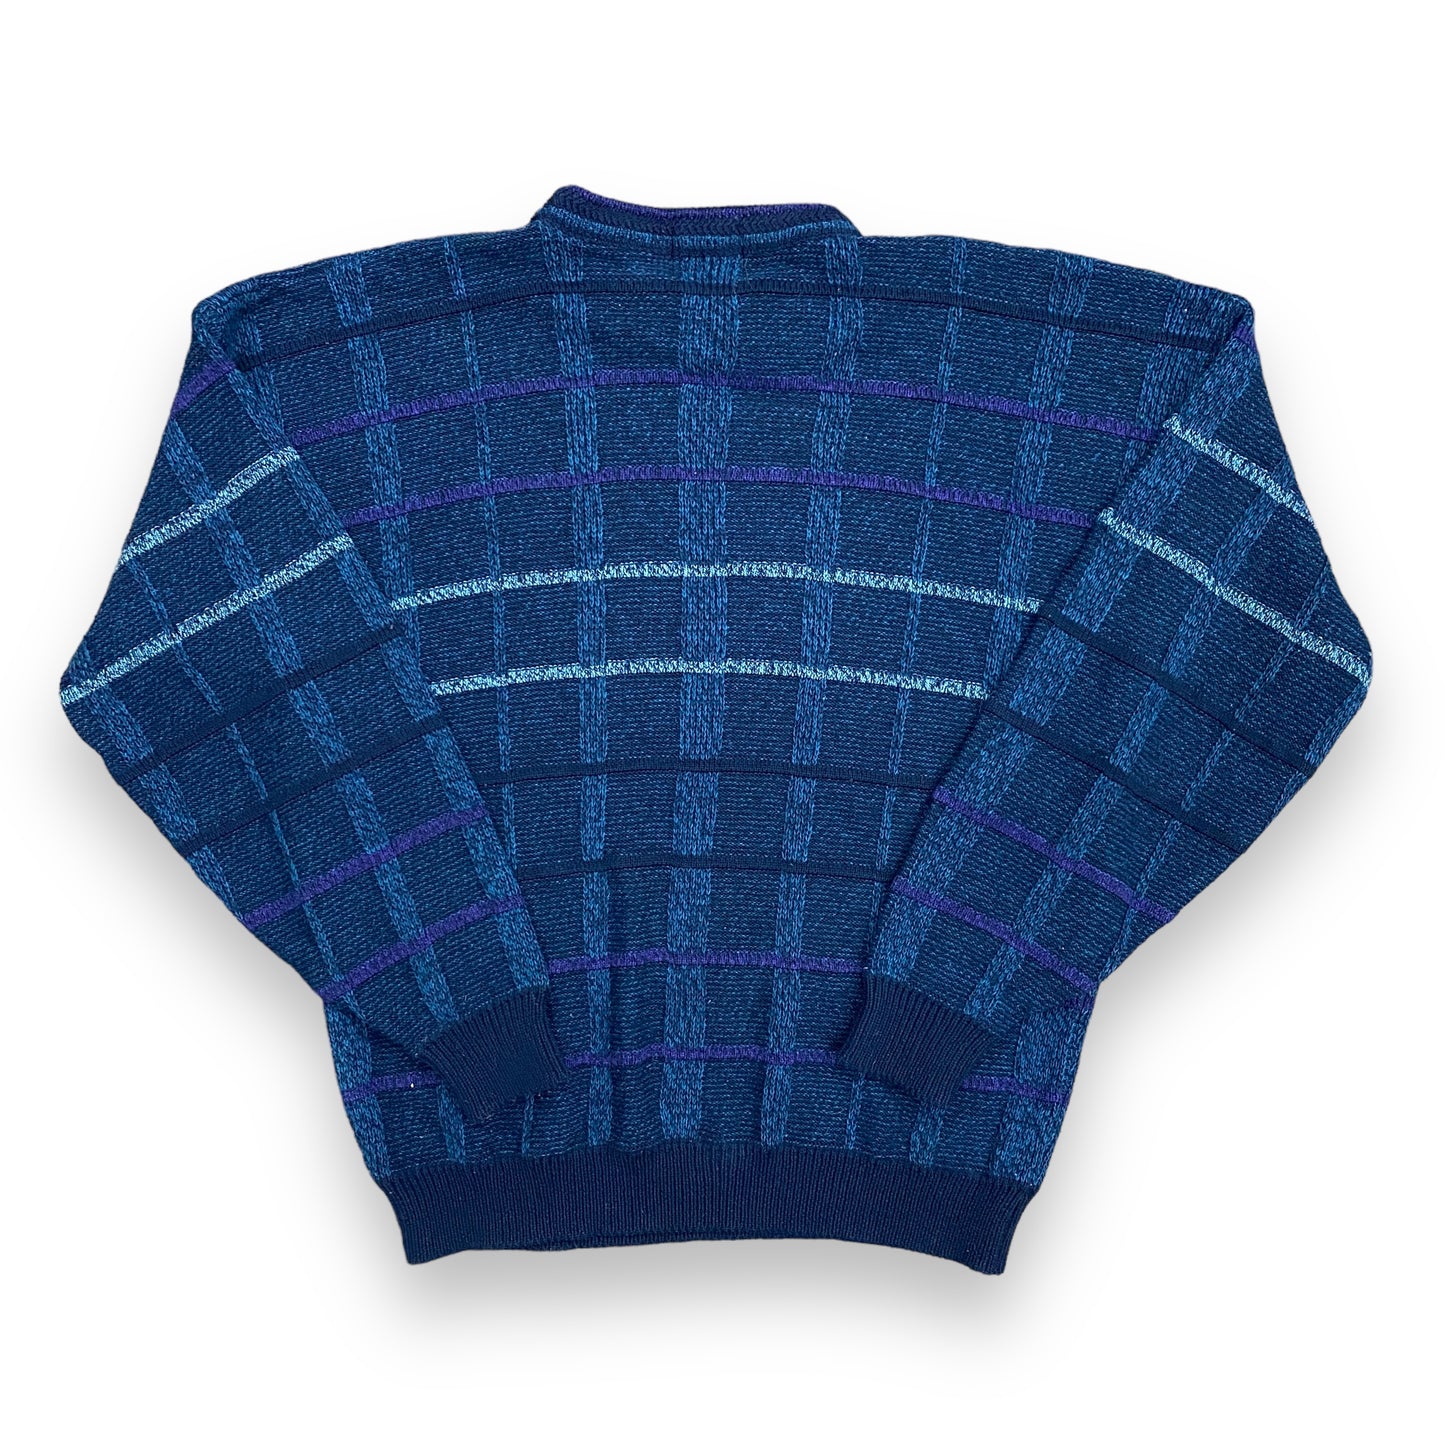 Vintage 90s Robert Bruce Navy Blue & Purple Checkered Sweater - Size Large